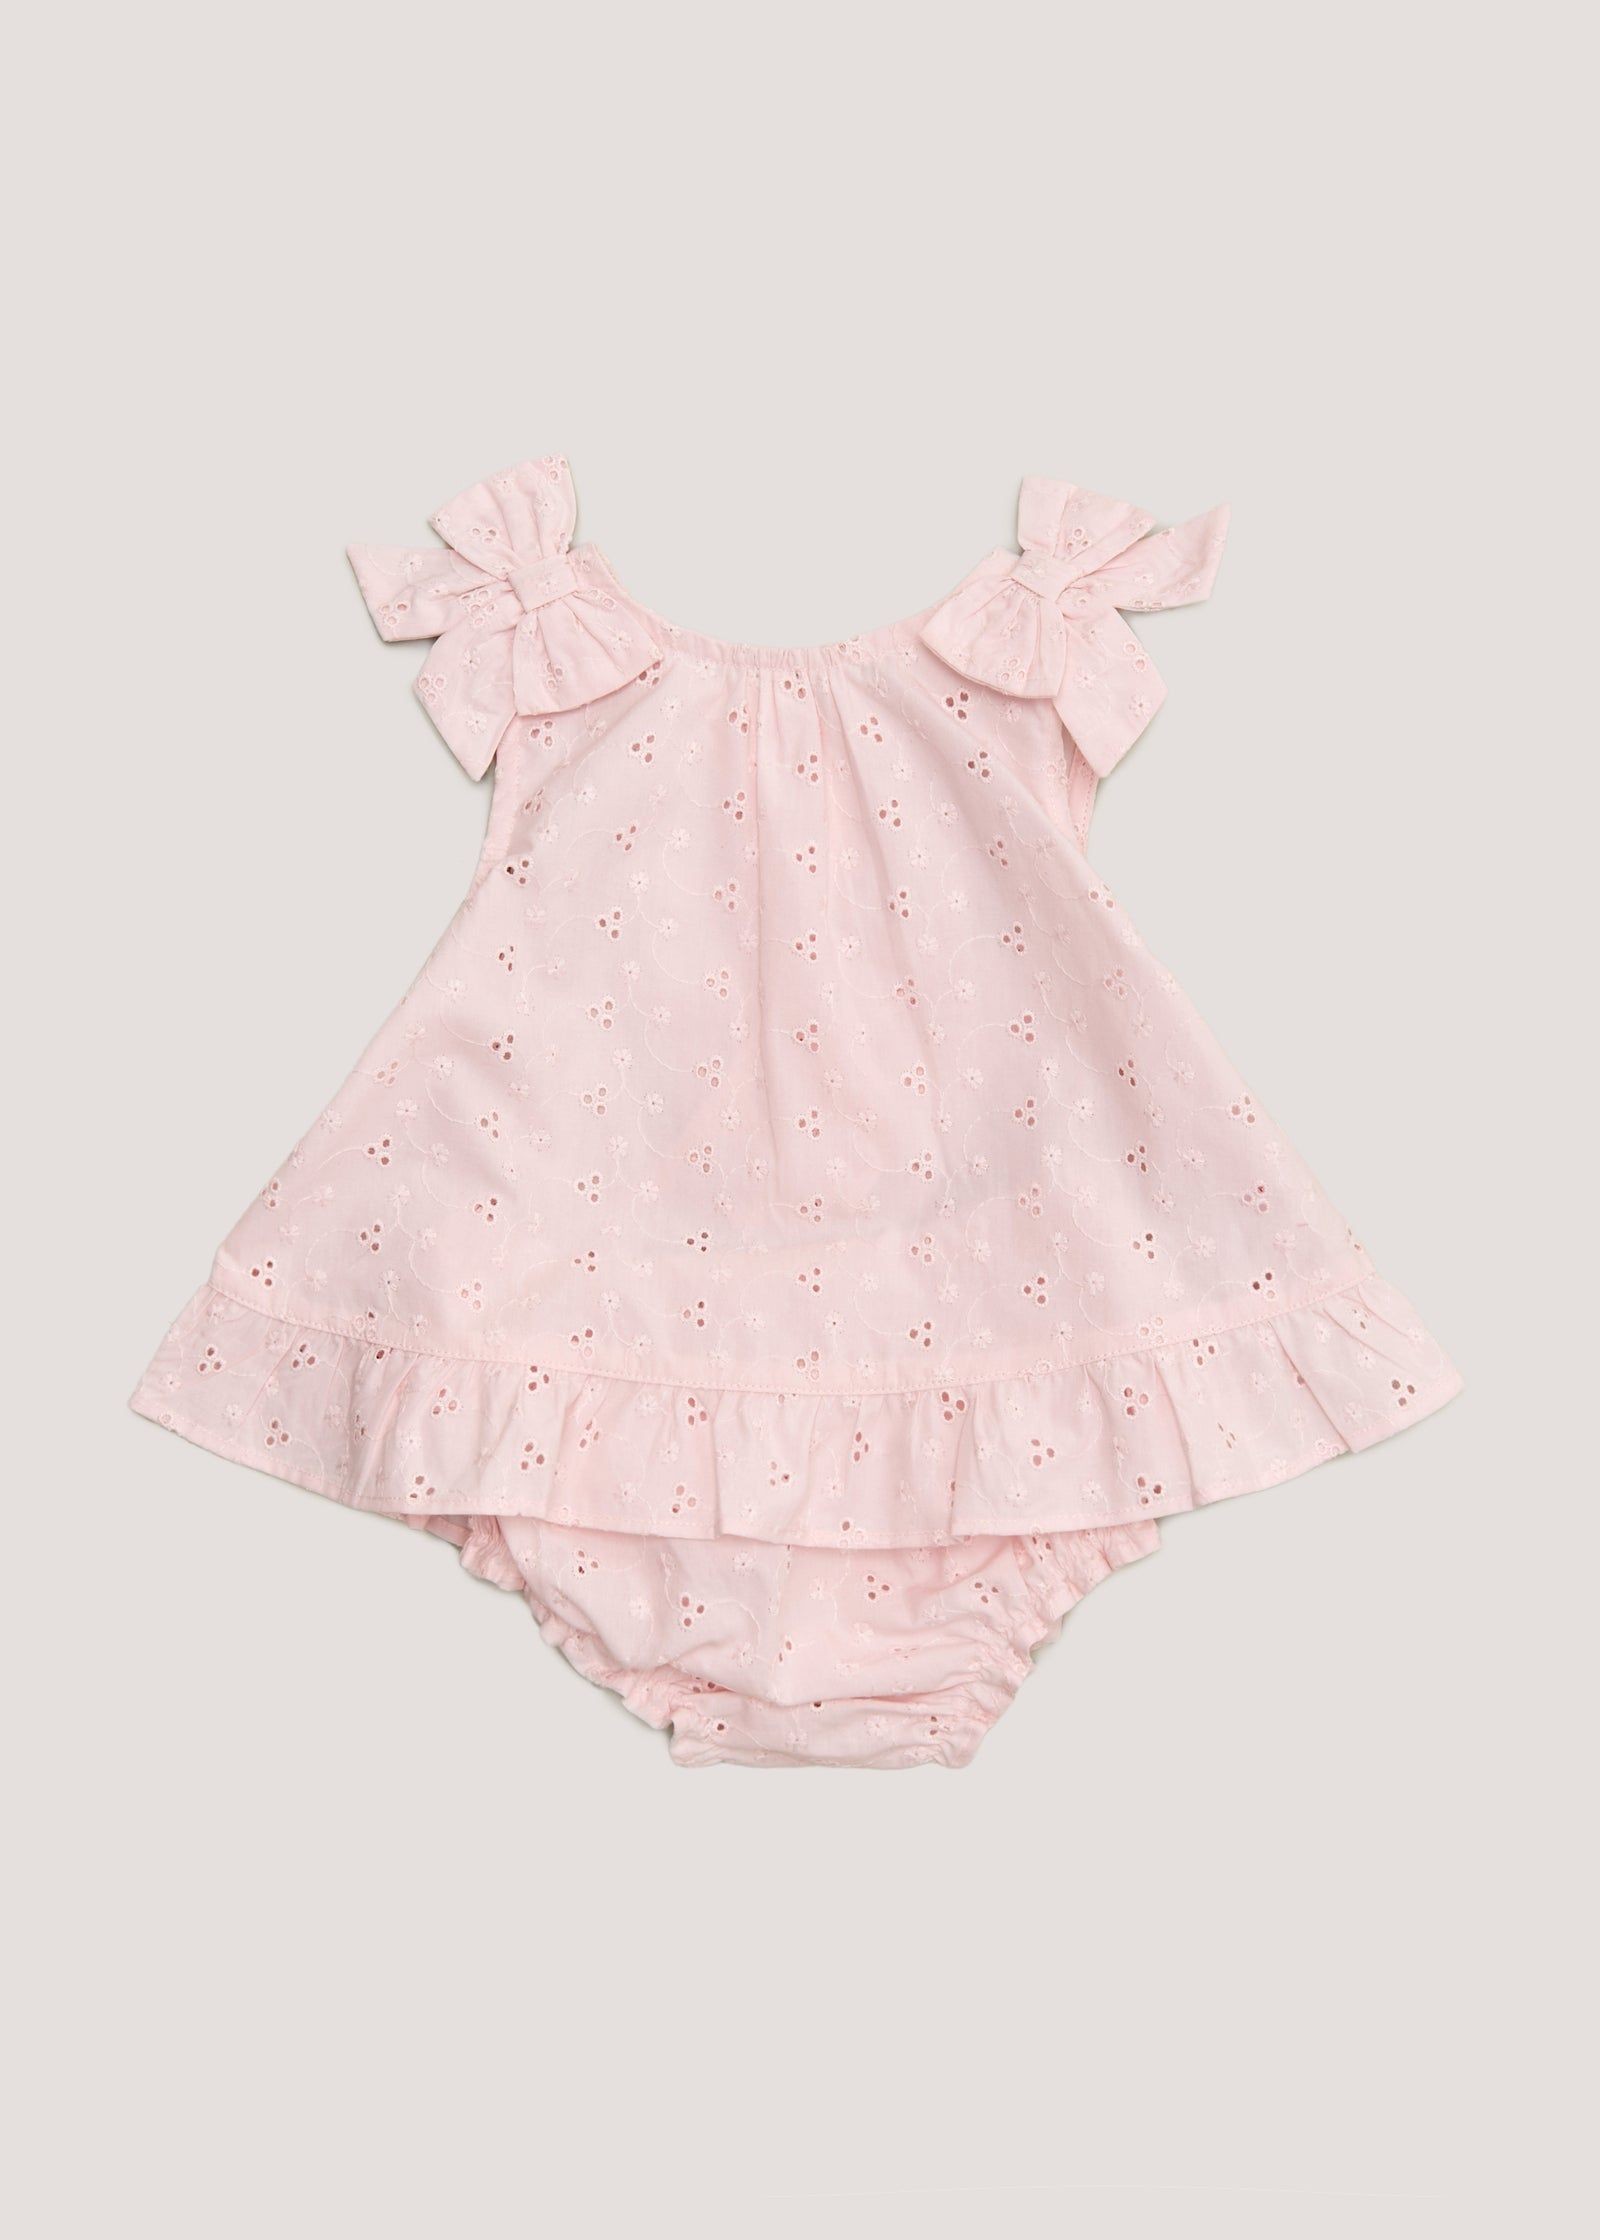 Baby's frilly knickers in ivory, white or pink in sizes from birth